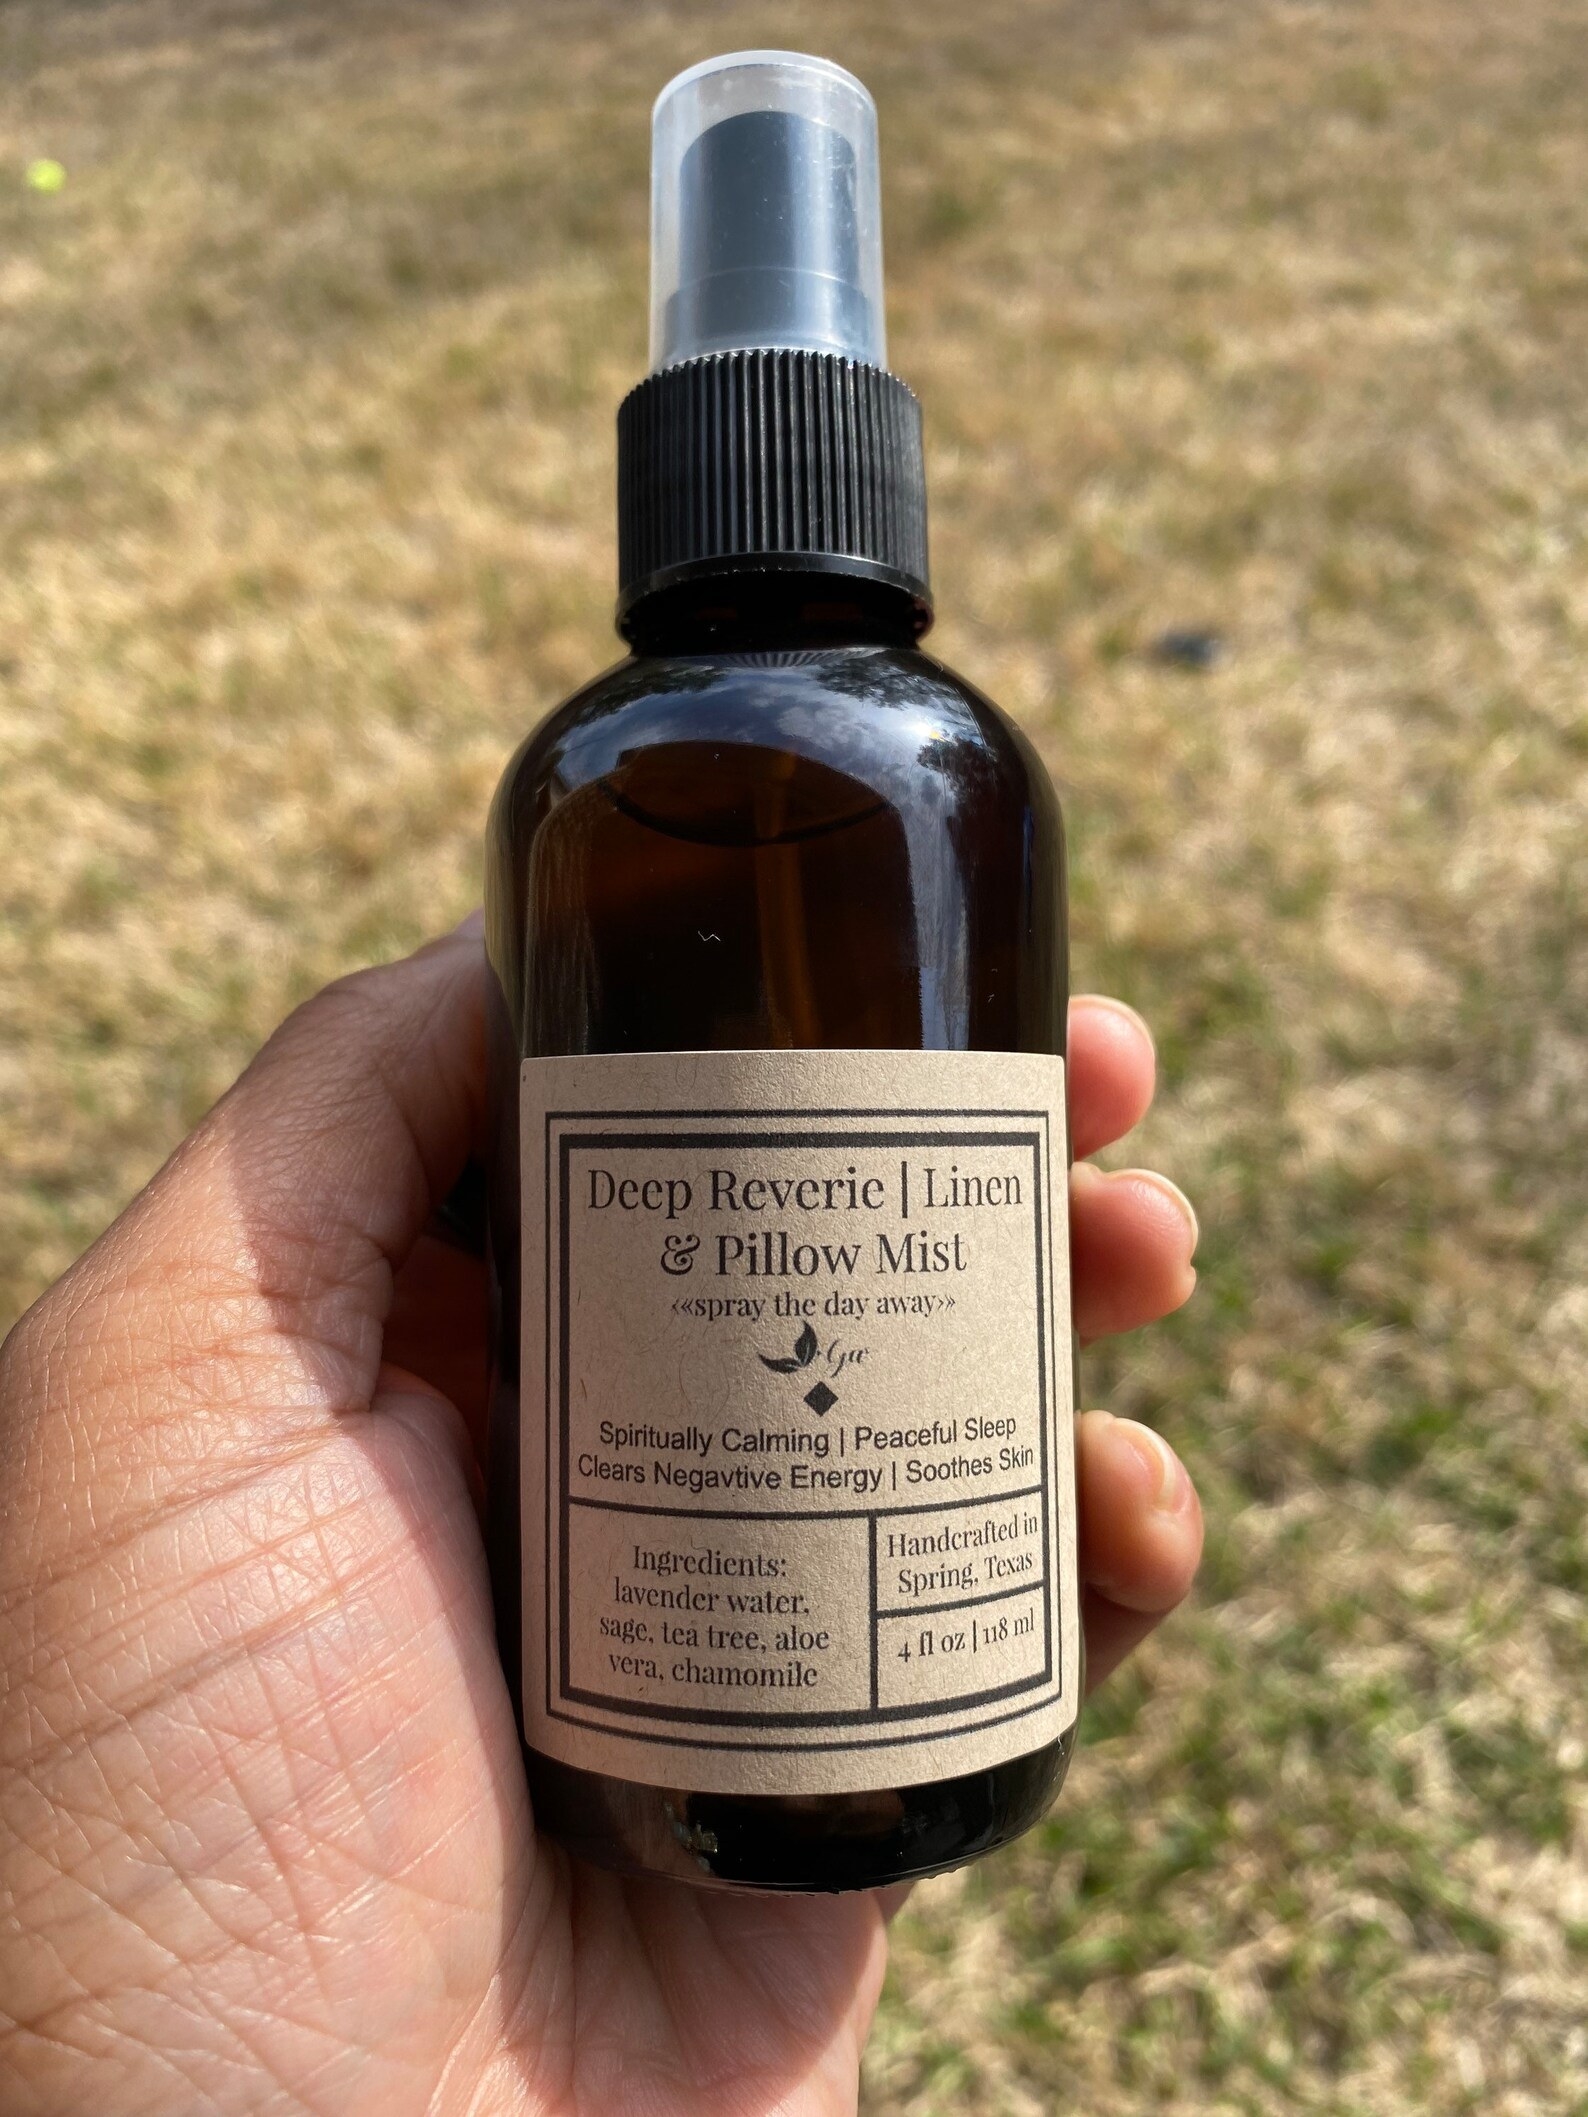 The pillow spray in a glass bottle